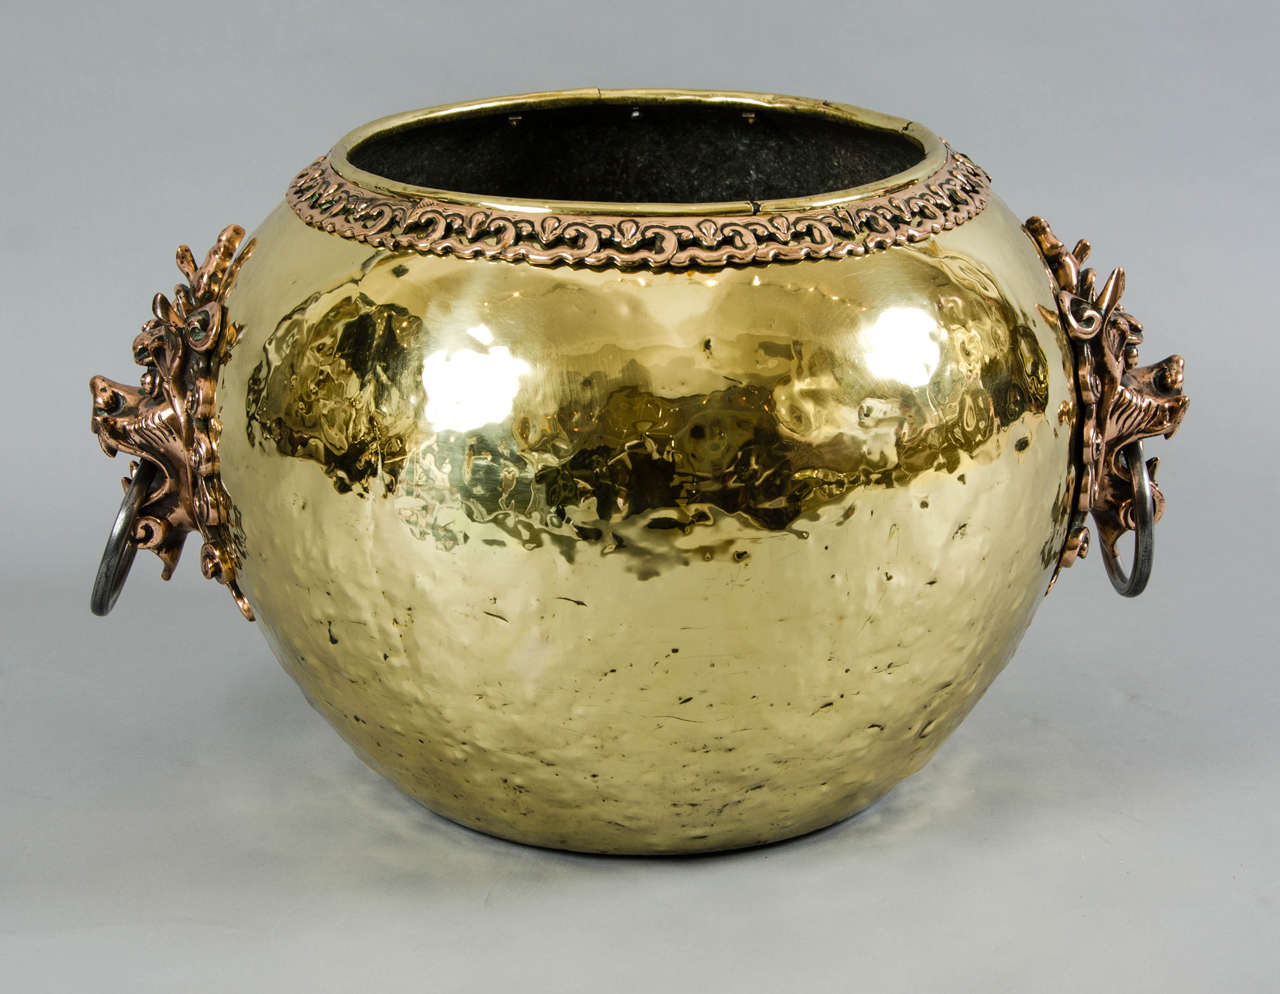 A large brass, Victorian jardiniere or wine cooler, with distinctive dragon handles.